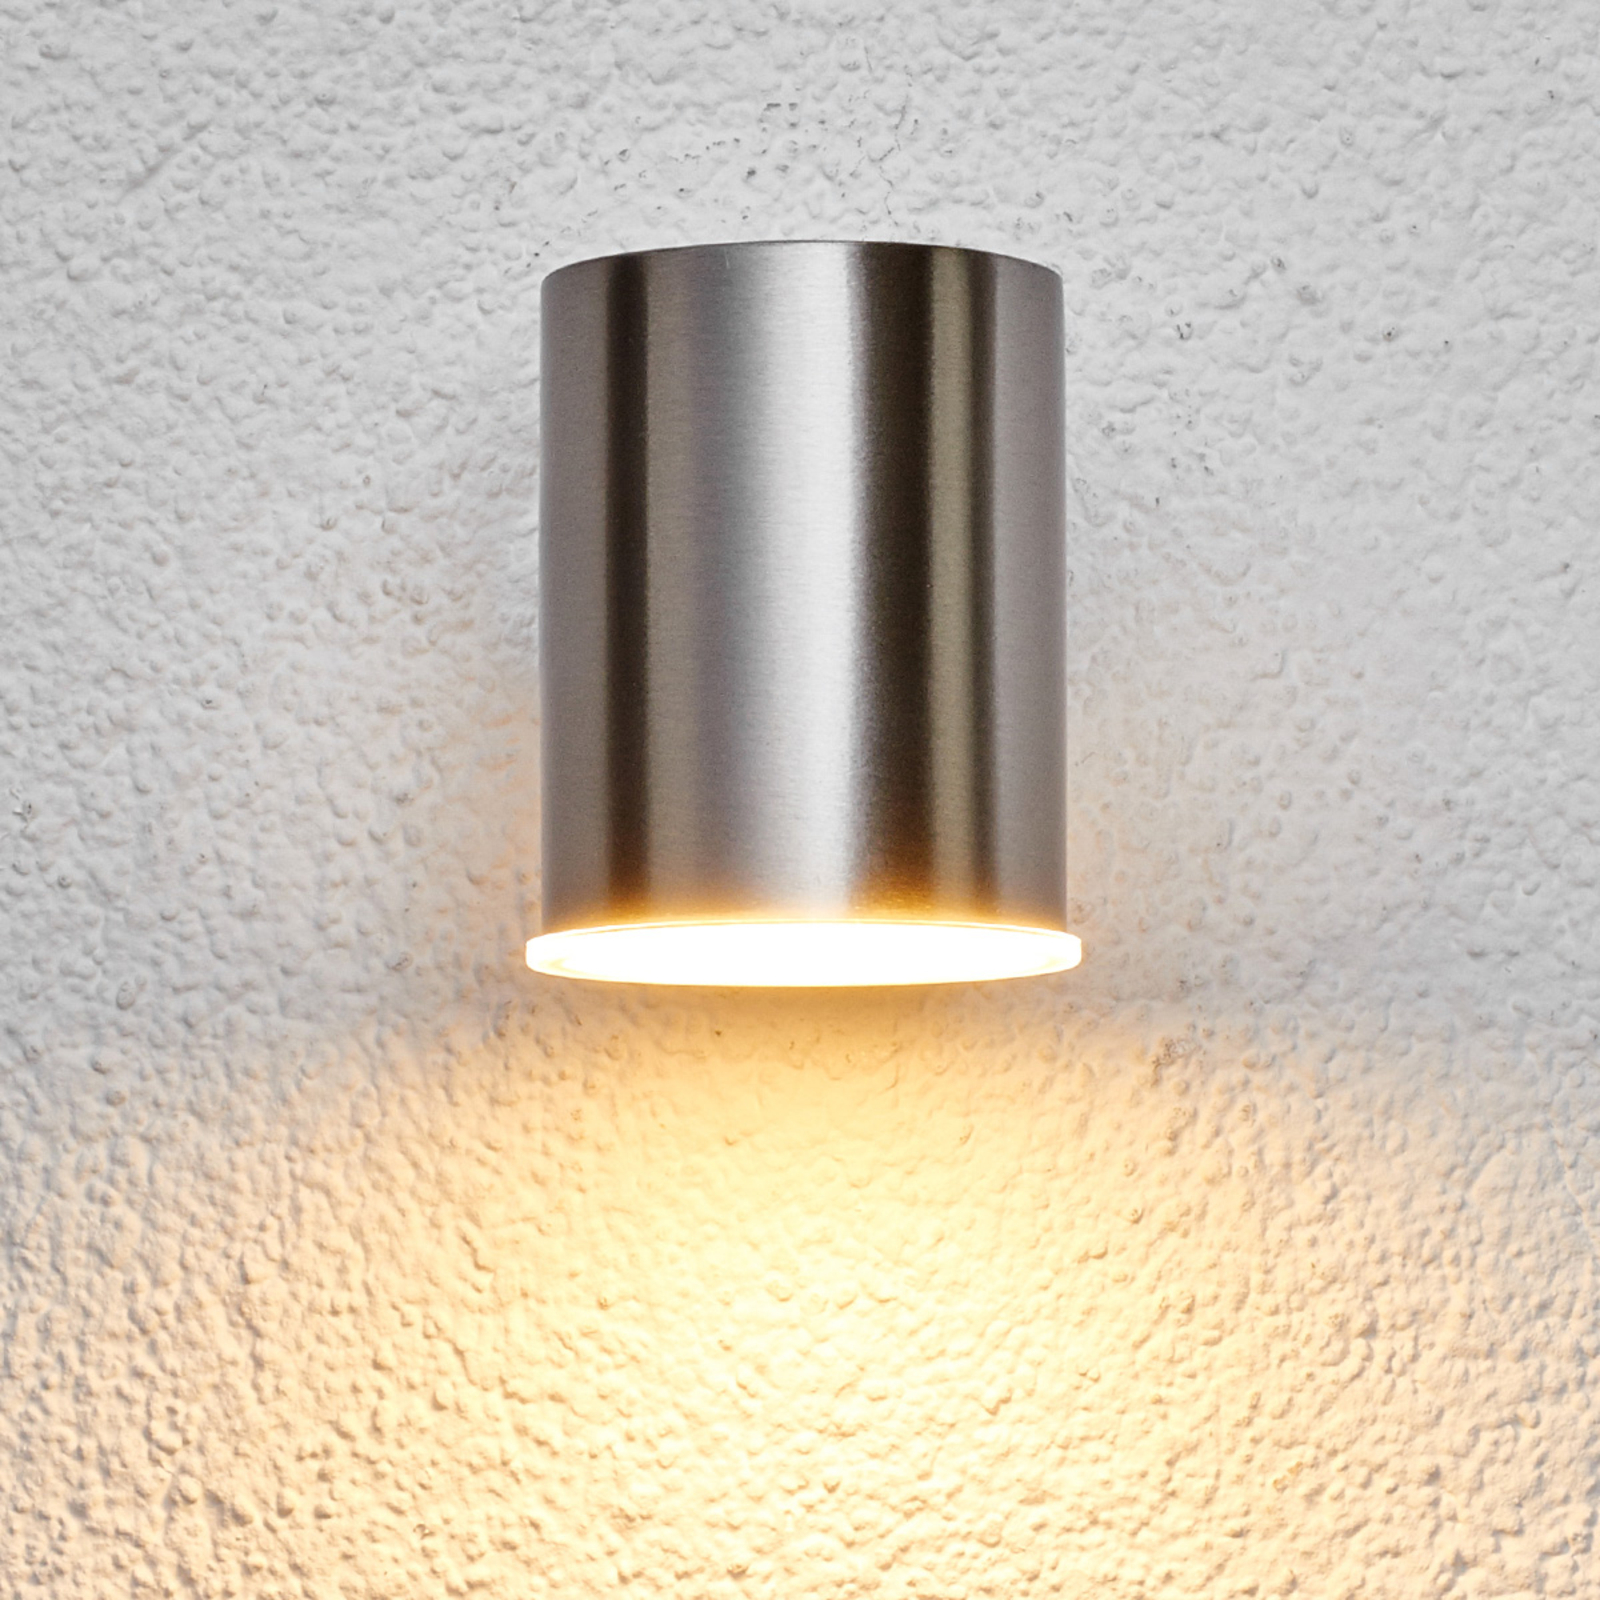 Round Morena LED stainless steel wall light